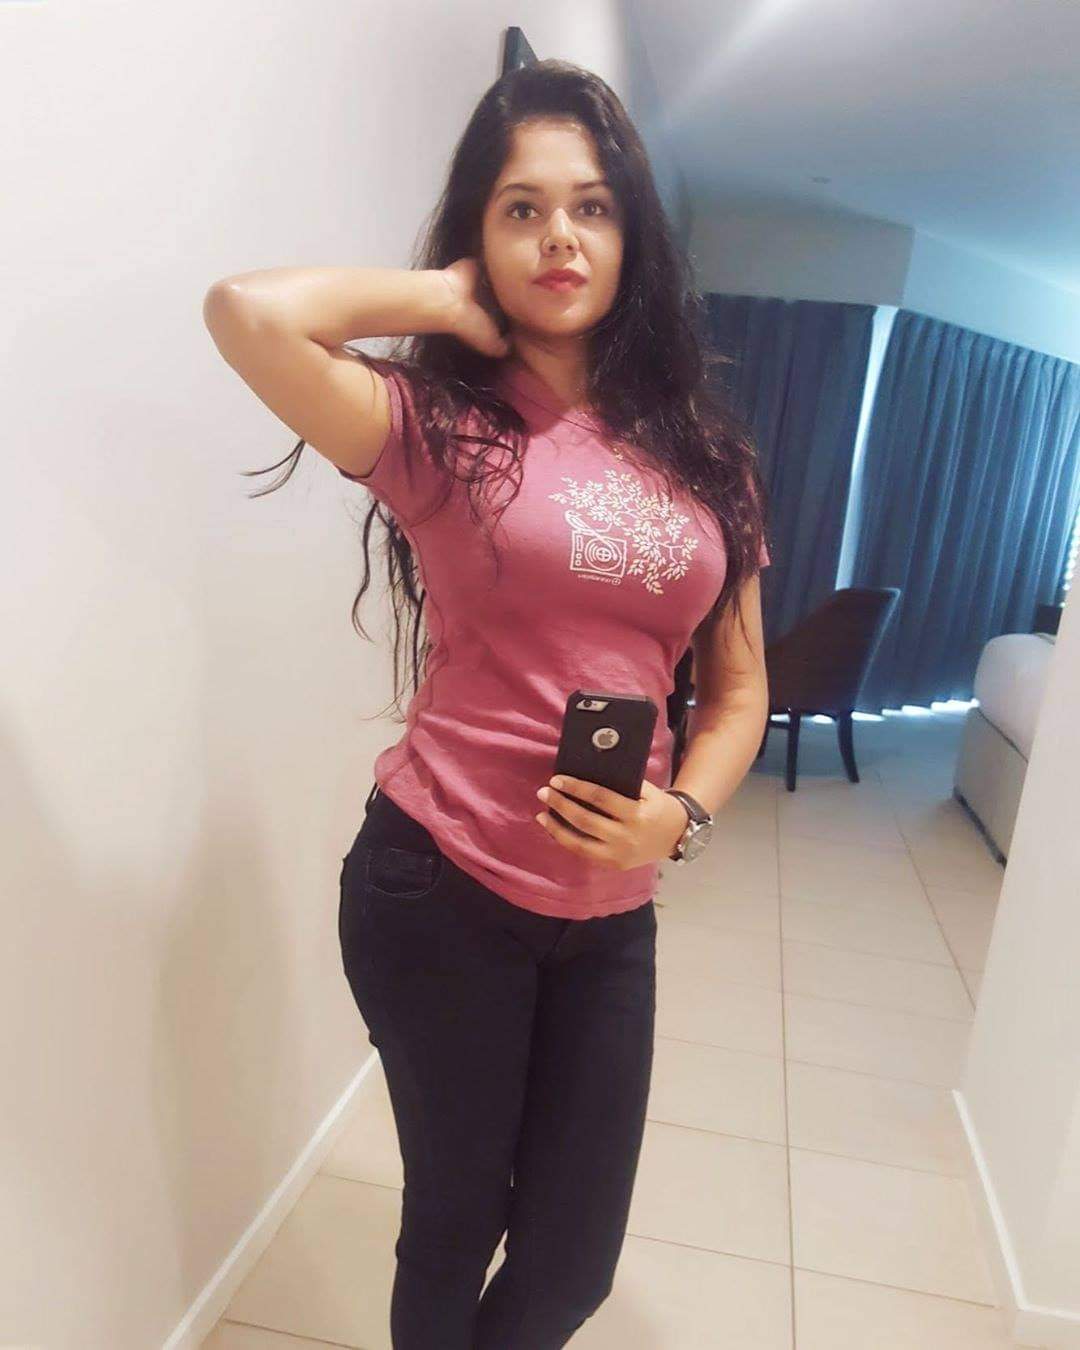 NAGPUR ALL AREA🔥HOT&SEXY BEST CALL GIRL AVAILABLE SAFE HOTEL&HOME